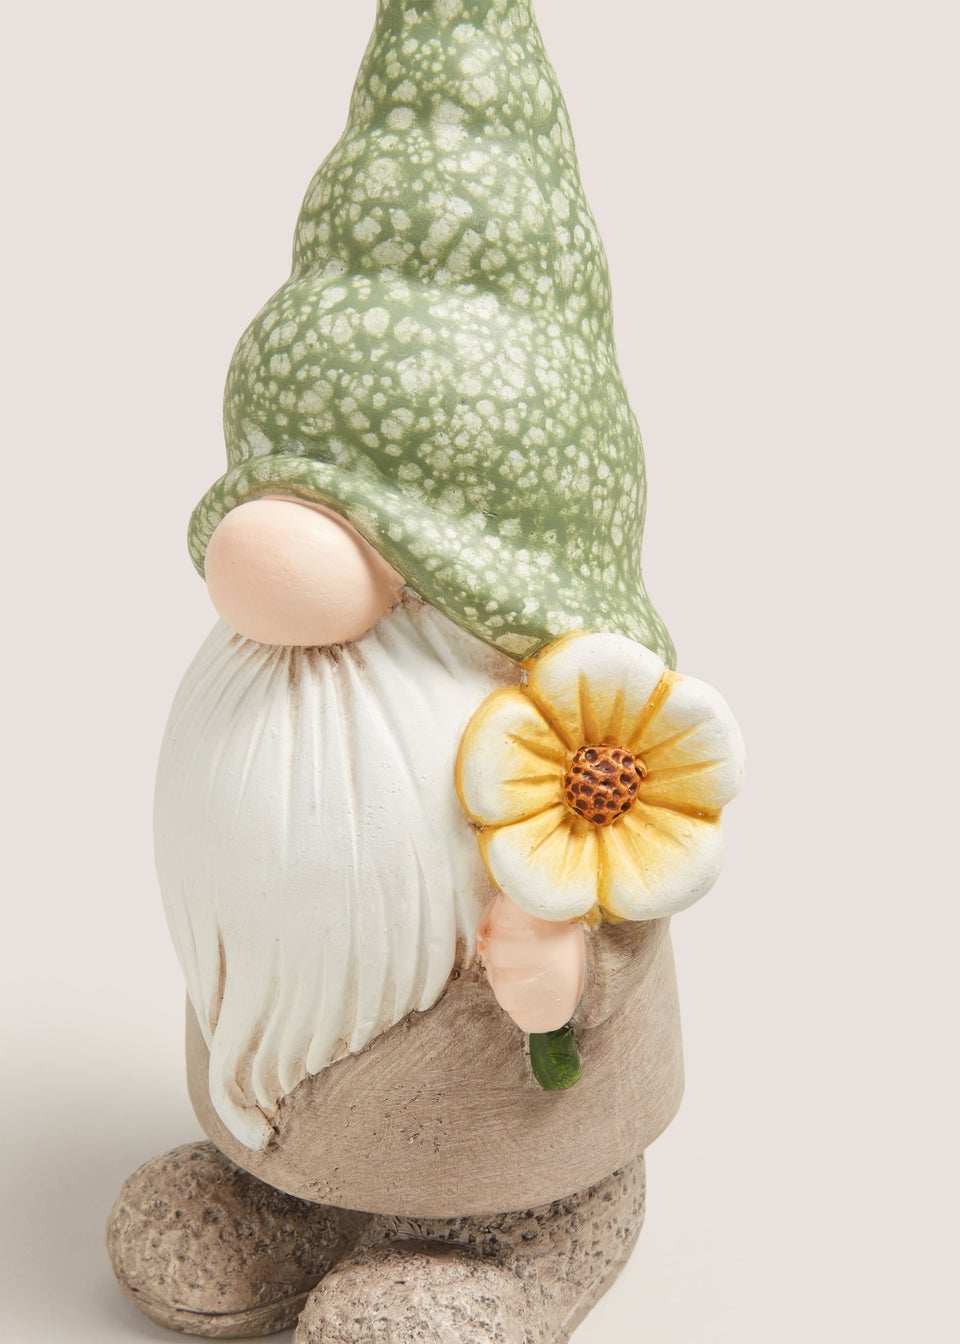 Outdoor Gnome Ornament With Flower